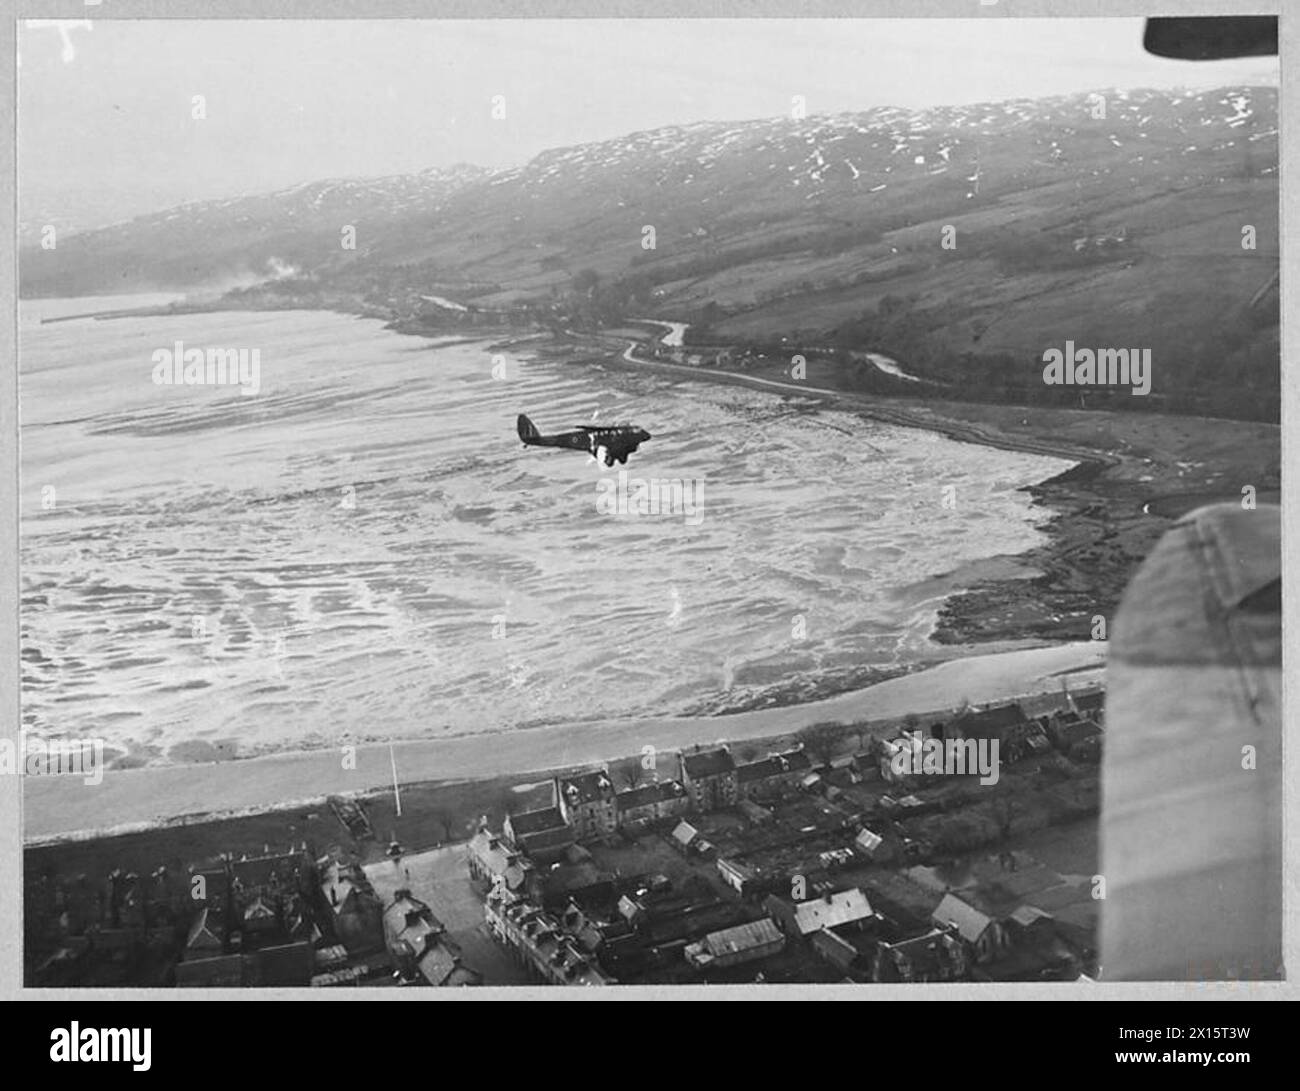 R.A.F. TRANSPORT COMMAND 'INTERNAL' FLYING - 14710 Picture (issued 1945) shows - A Dominie upproaching Colonsay Island, on the journey to Benbecula, in the Outer Hebrides Royal Air Force Stock Photo